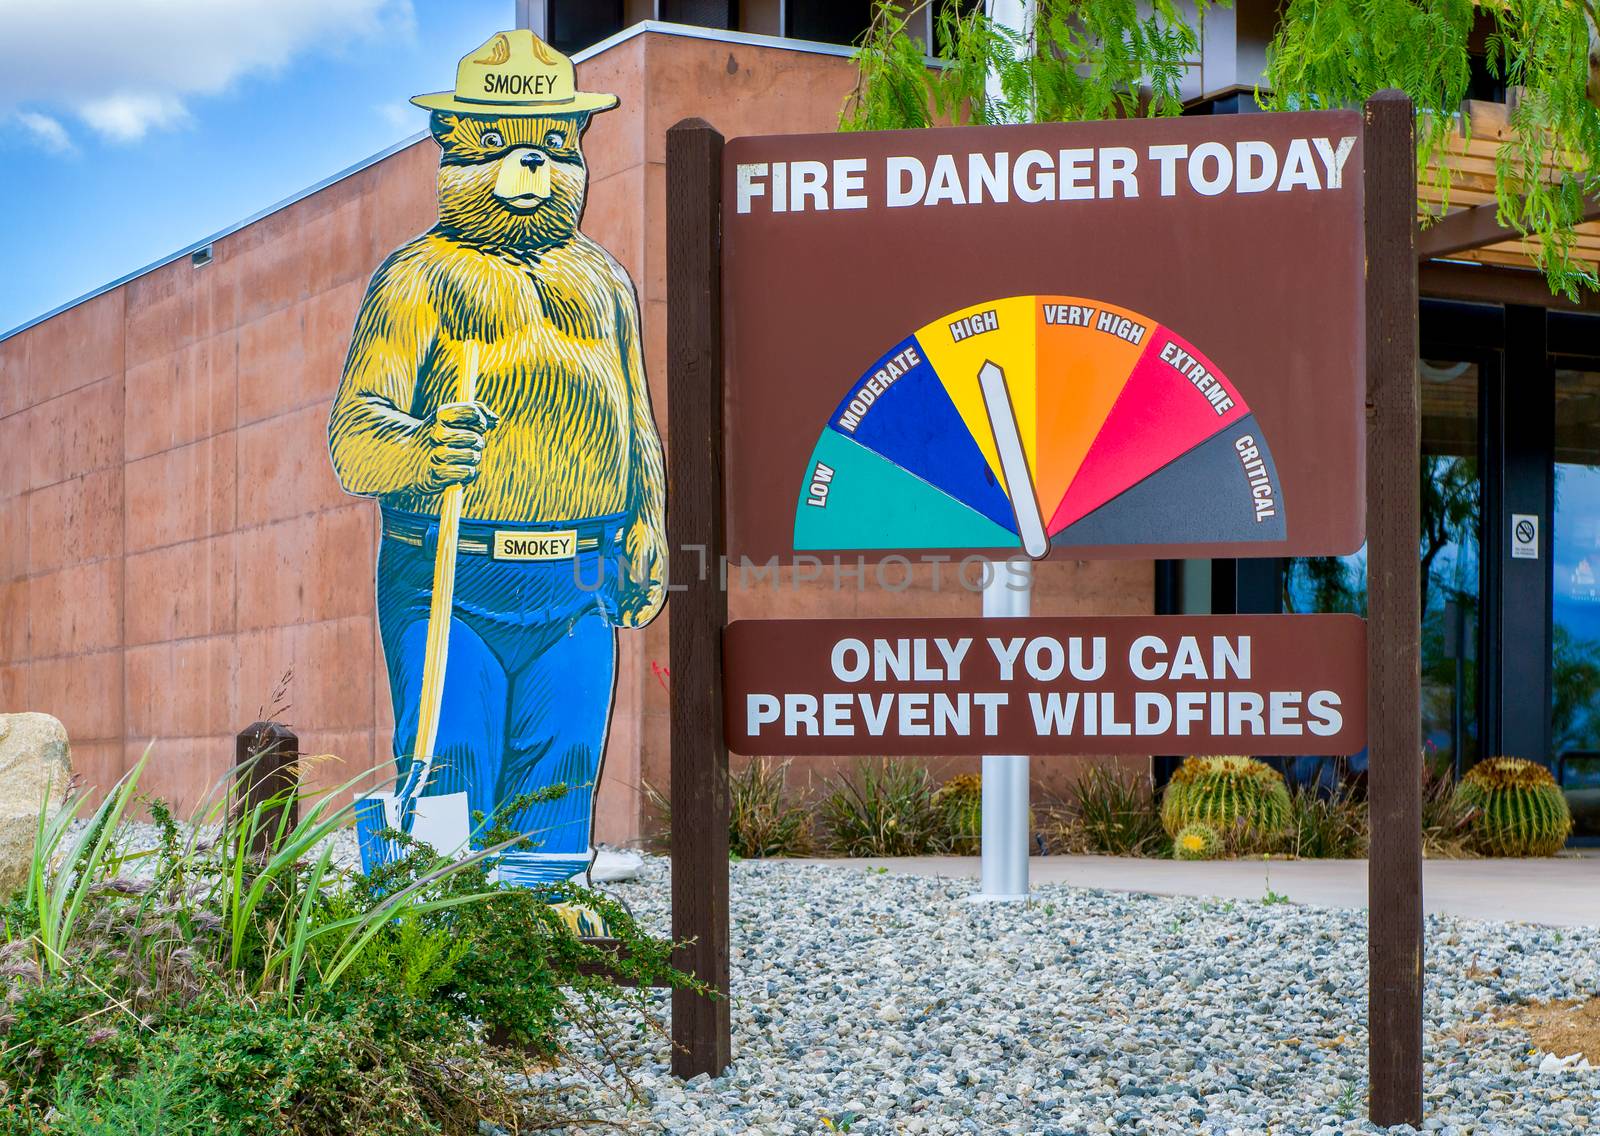 ACTON, CA/USA - MAY 7, 2016: Smokey Bear mascot and fire danger sign. Smokey the Bear is an advertising mascot to educate the public about forest fires.